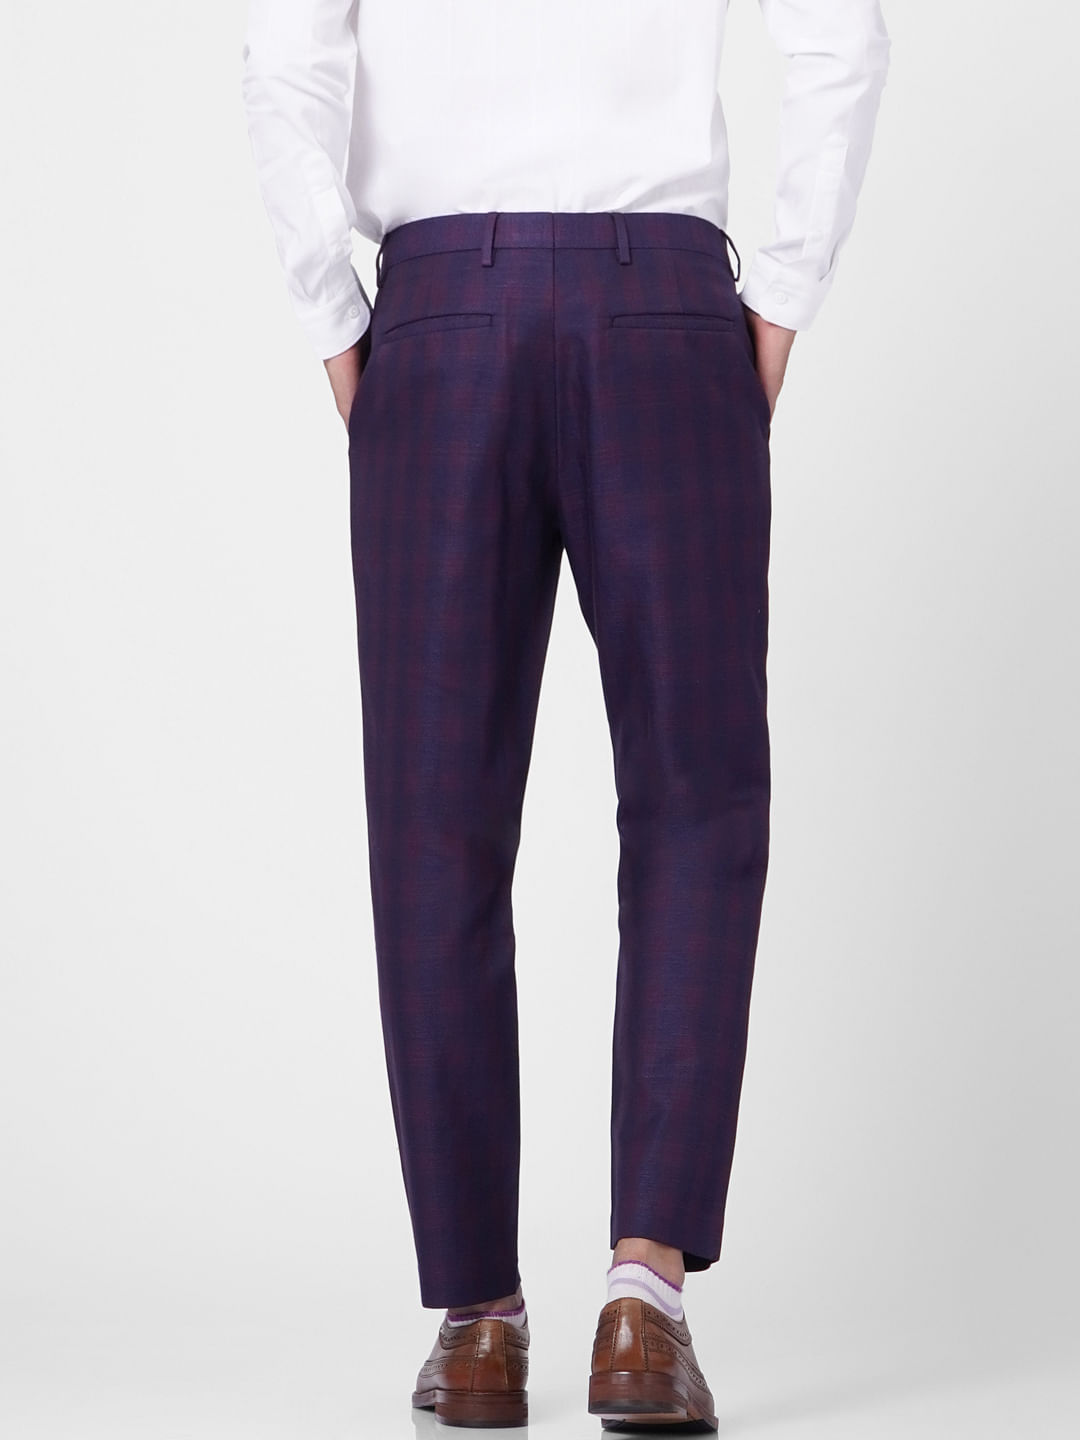 Buy White Brown Check Regular Fit Solid Trouser Cotton for Best Price,  Reviews, Free Shipping